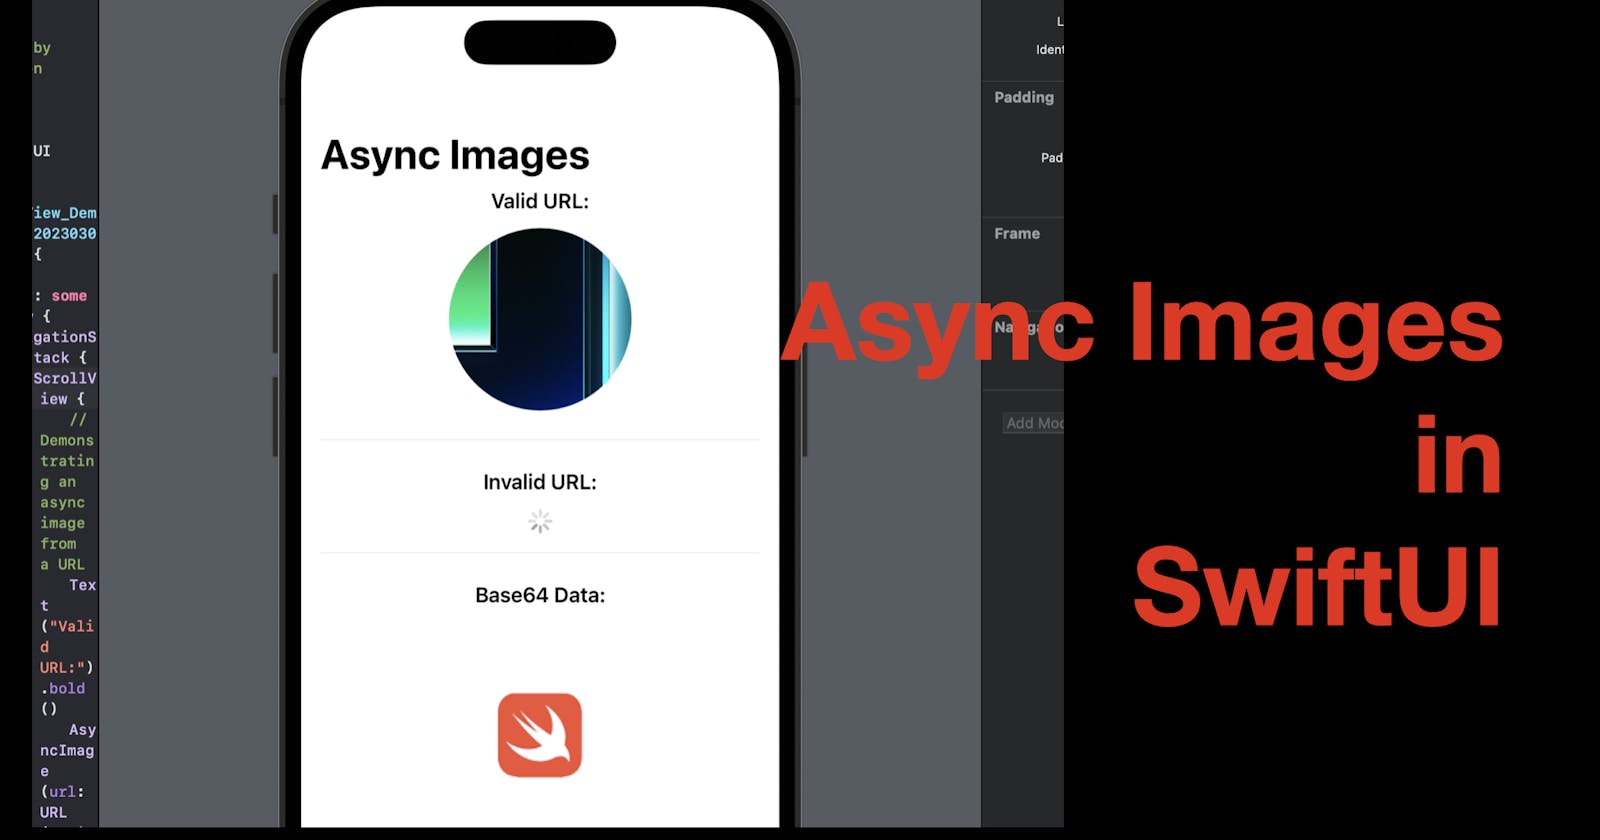 Async Images in SwiftUI